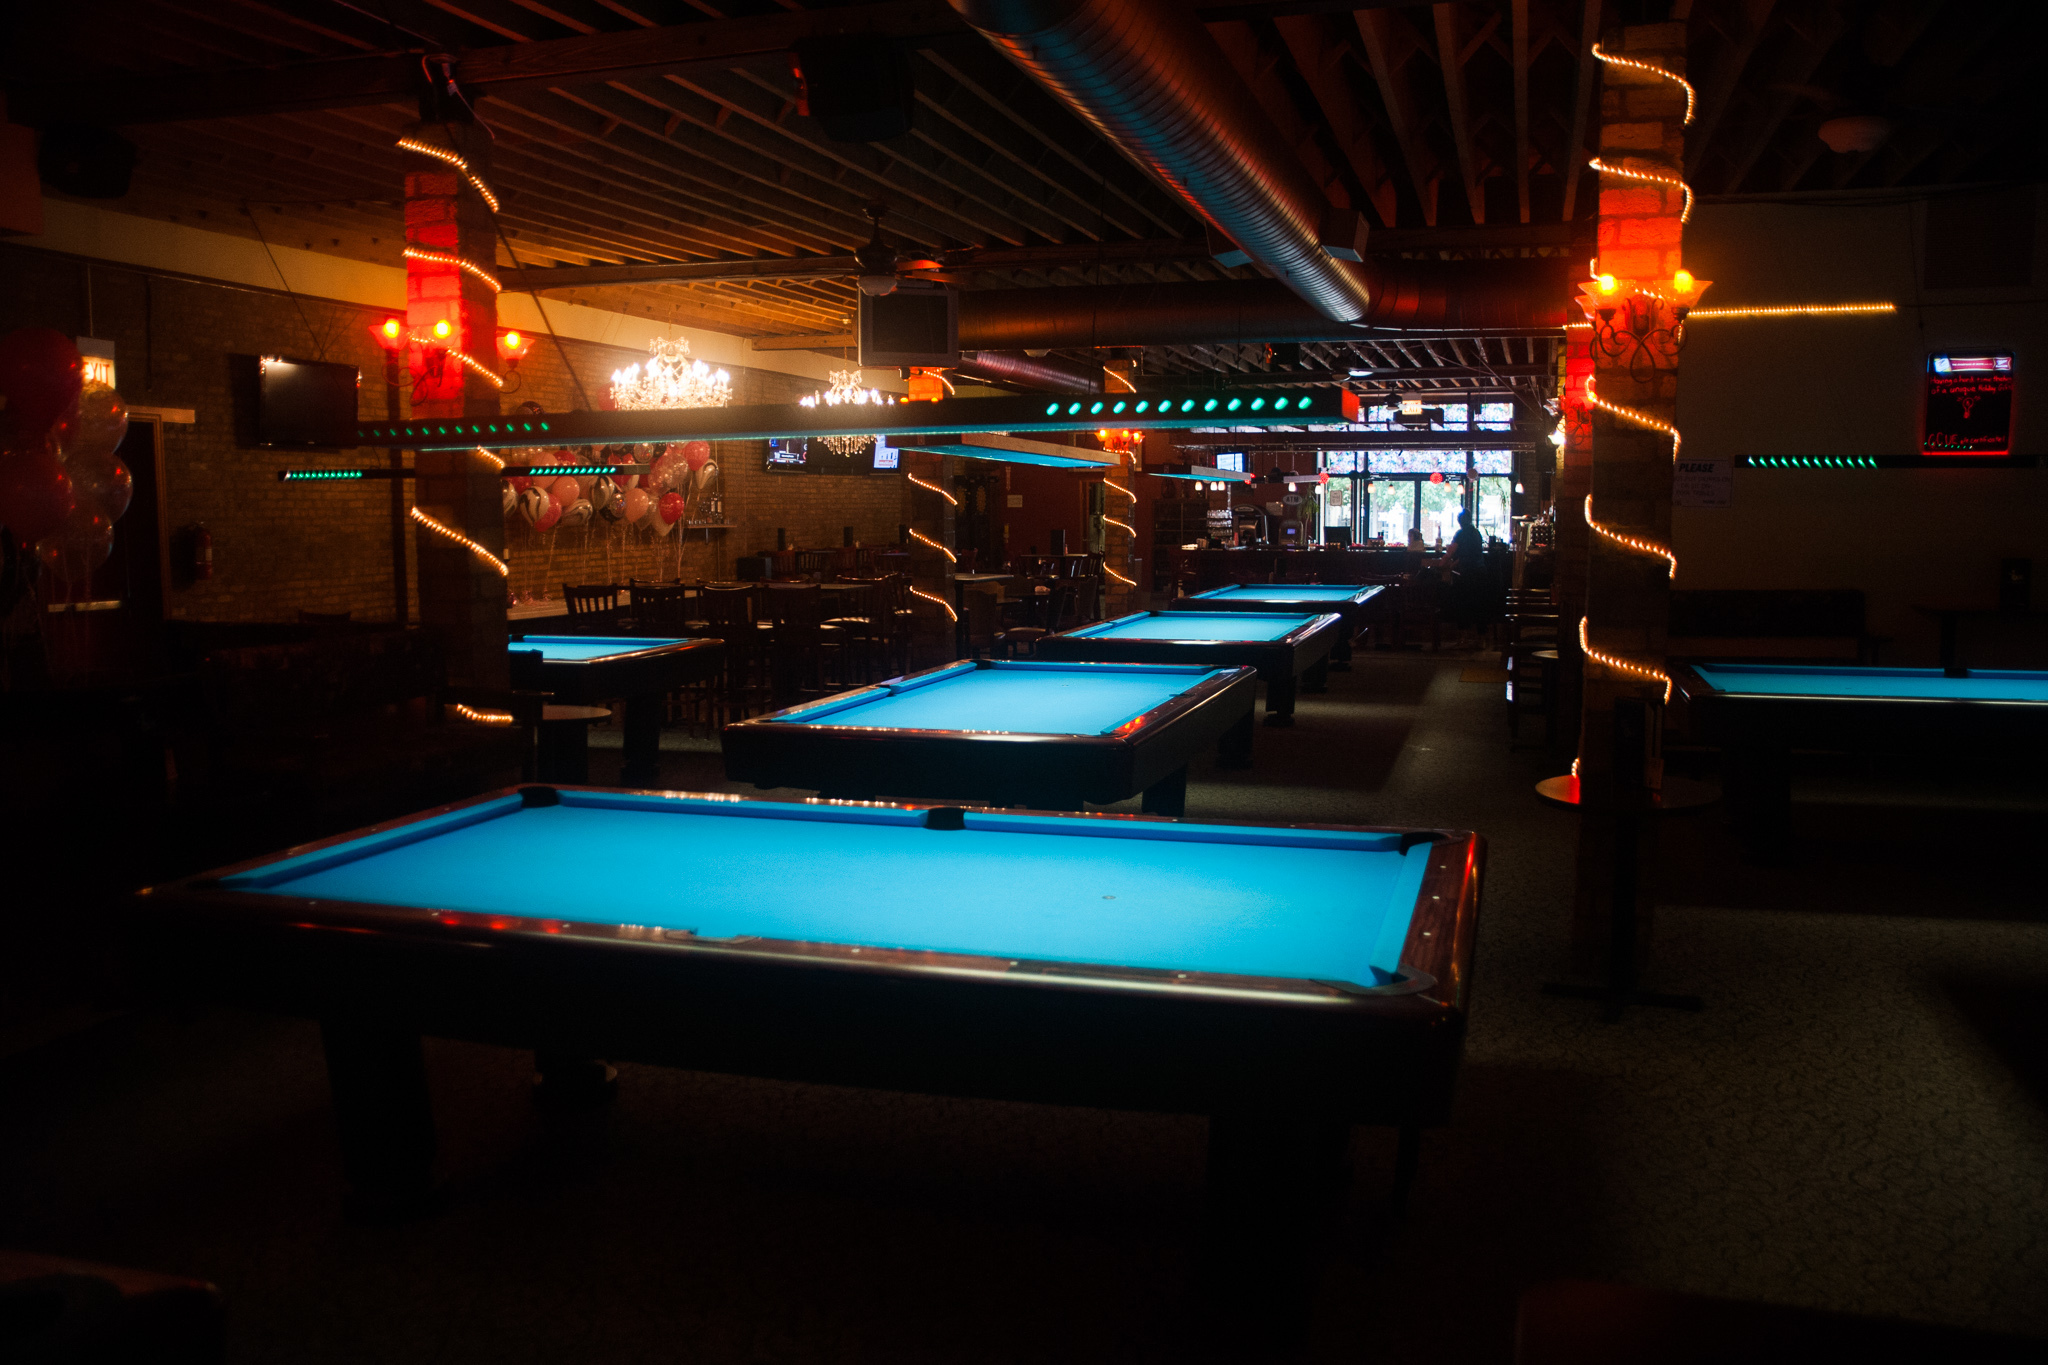 G Cue Billiards and Restaurant | Bars in West Loop, Chicago